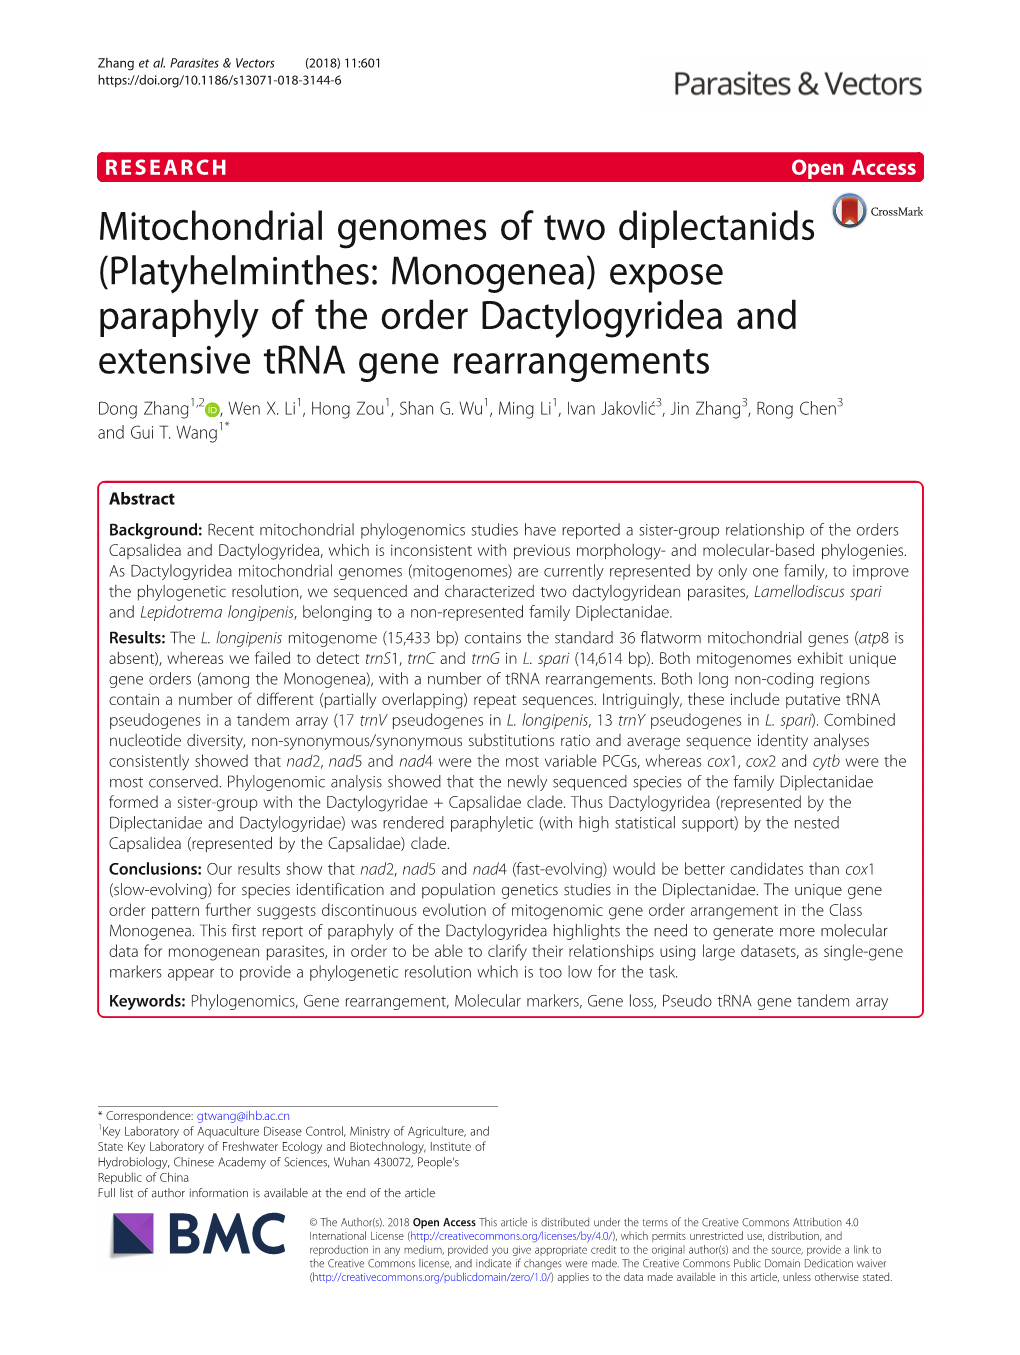 Mitochondrial Genomes of Two Diplectanids (Platyhelminthes